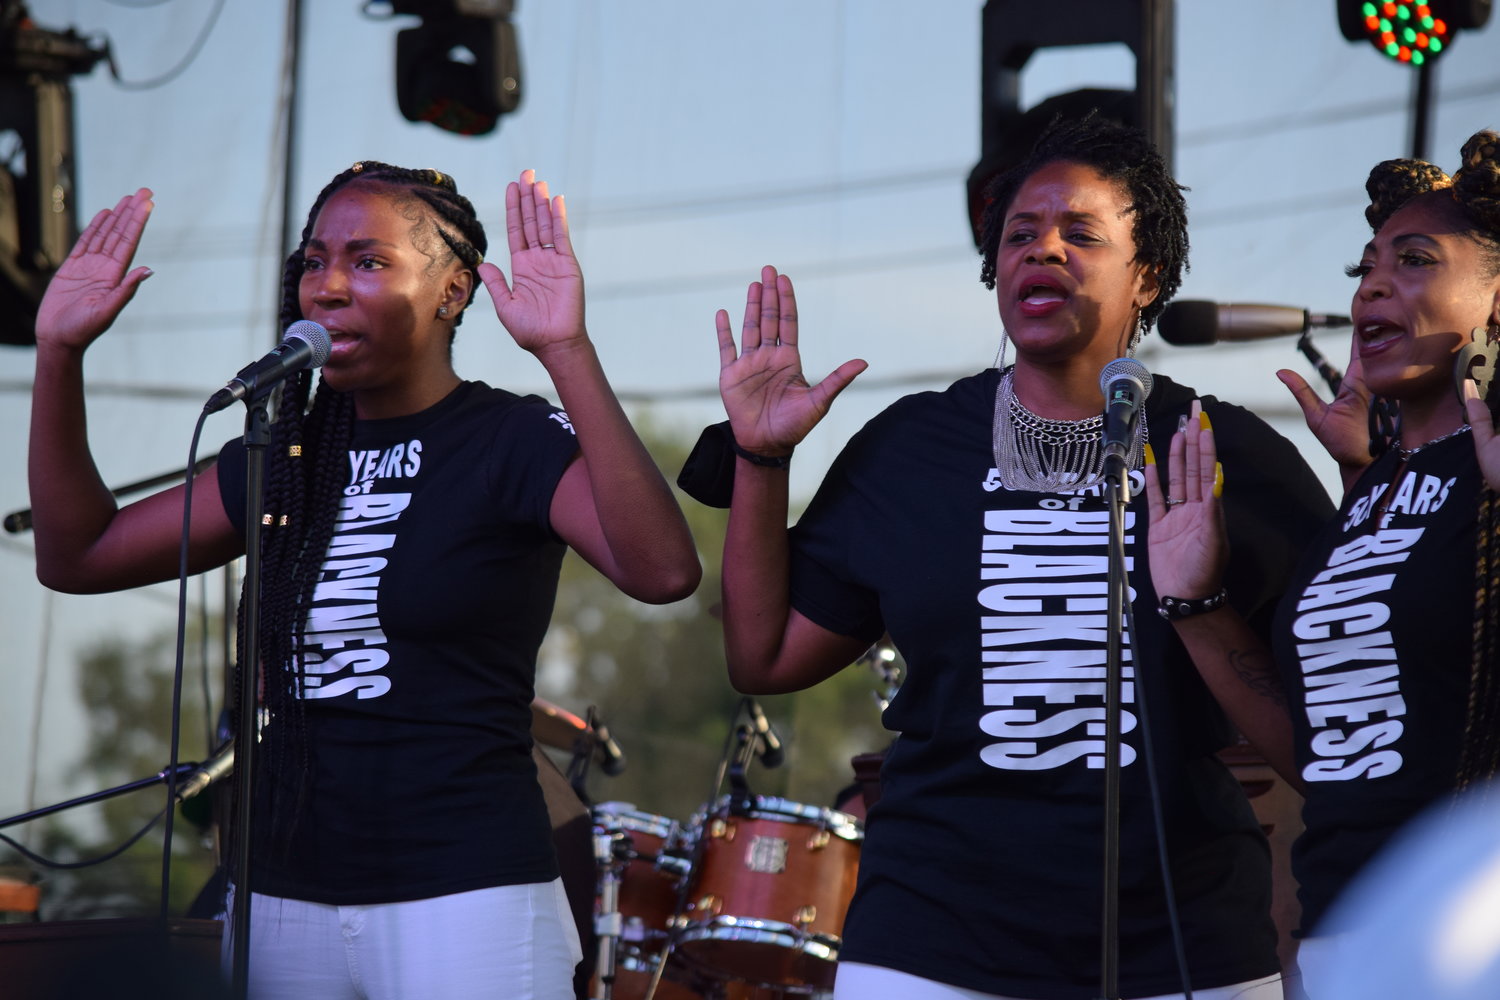 Three time Grammy Award Winning Sounds of Blackness, wearing t-shirts that say “50 years of Blackness” perform "Black Lives Matter: No Justice No Peace” and “Sick & Tired.” Their t-shirts read “50 Years of Blackness,” in celebration of their 50th anniversary this year. The chart-topping hit “Royalty” was introduced with a reminder to ignore those who try to paint George Floyd and others as “thugs,” because they’re royalty, kings and queens worthy of their crowns.